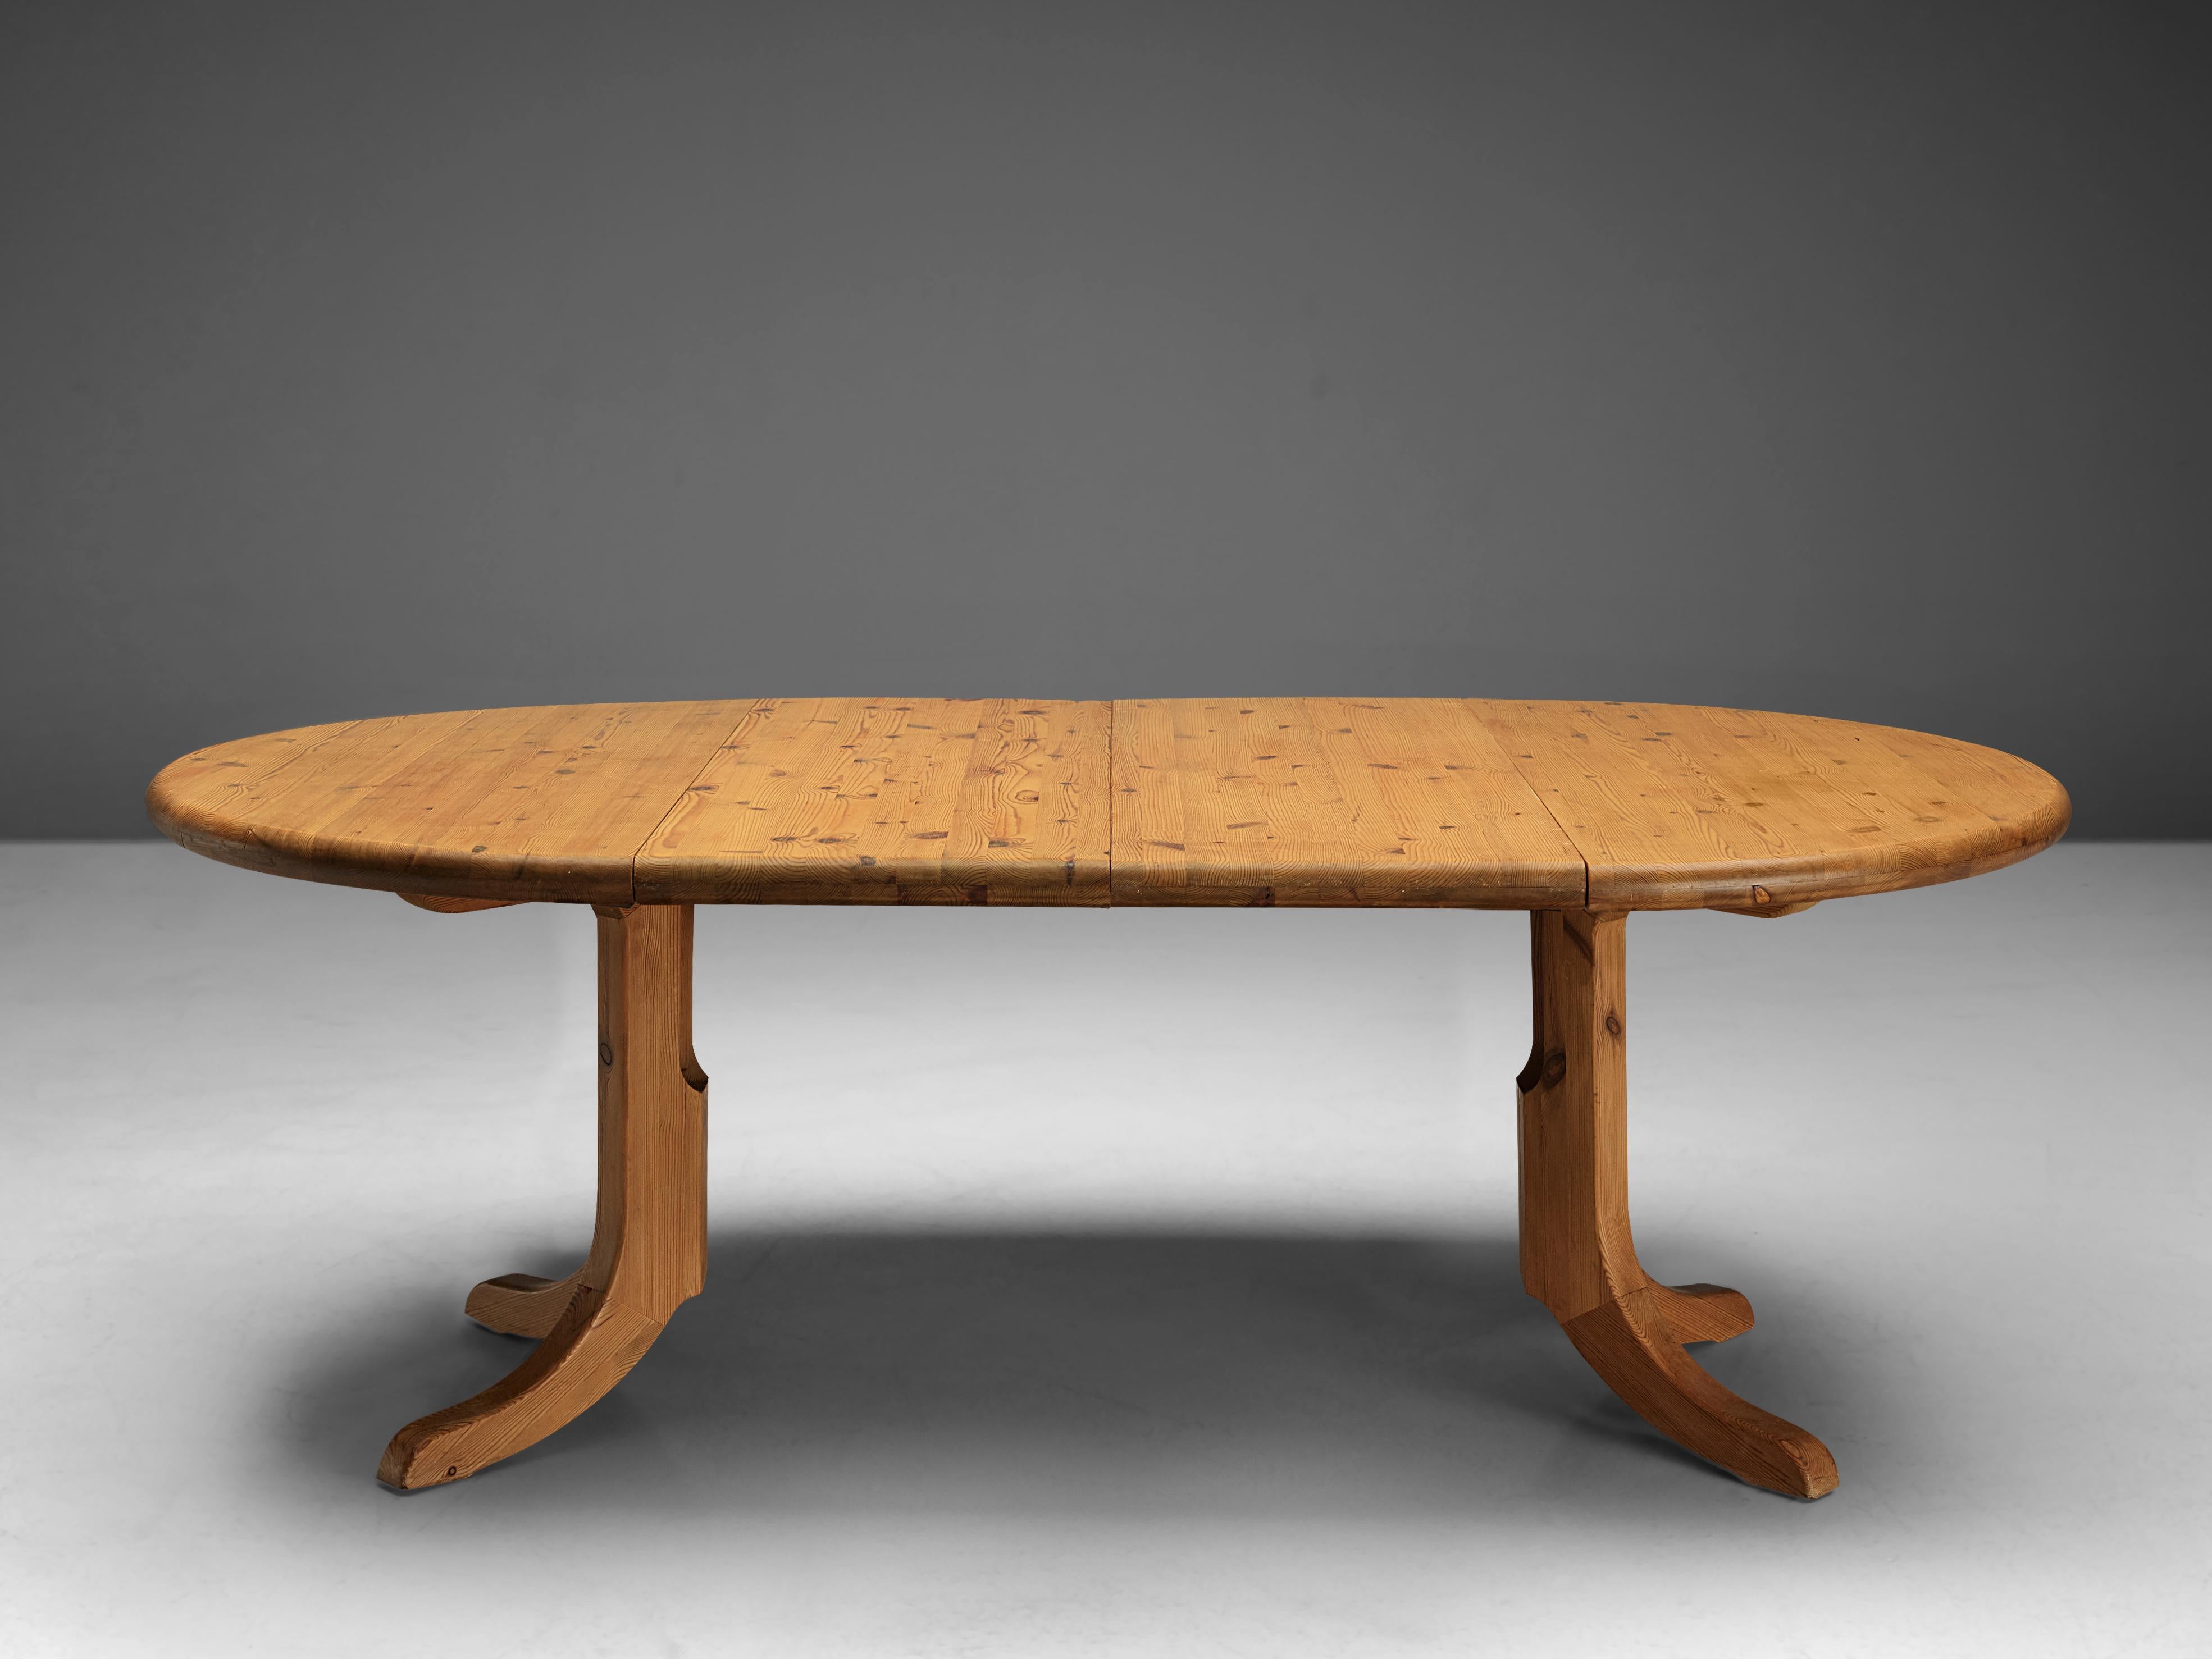 Rainer Daumiller, extendable dining table, pine, Denmark, 1970s.

Robust and simplistic dining or conference table in solid pine, designed by Rainer Daumiller. A modest design with a oval shaped tabletop and horizontally placed woodgrain. The